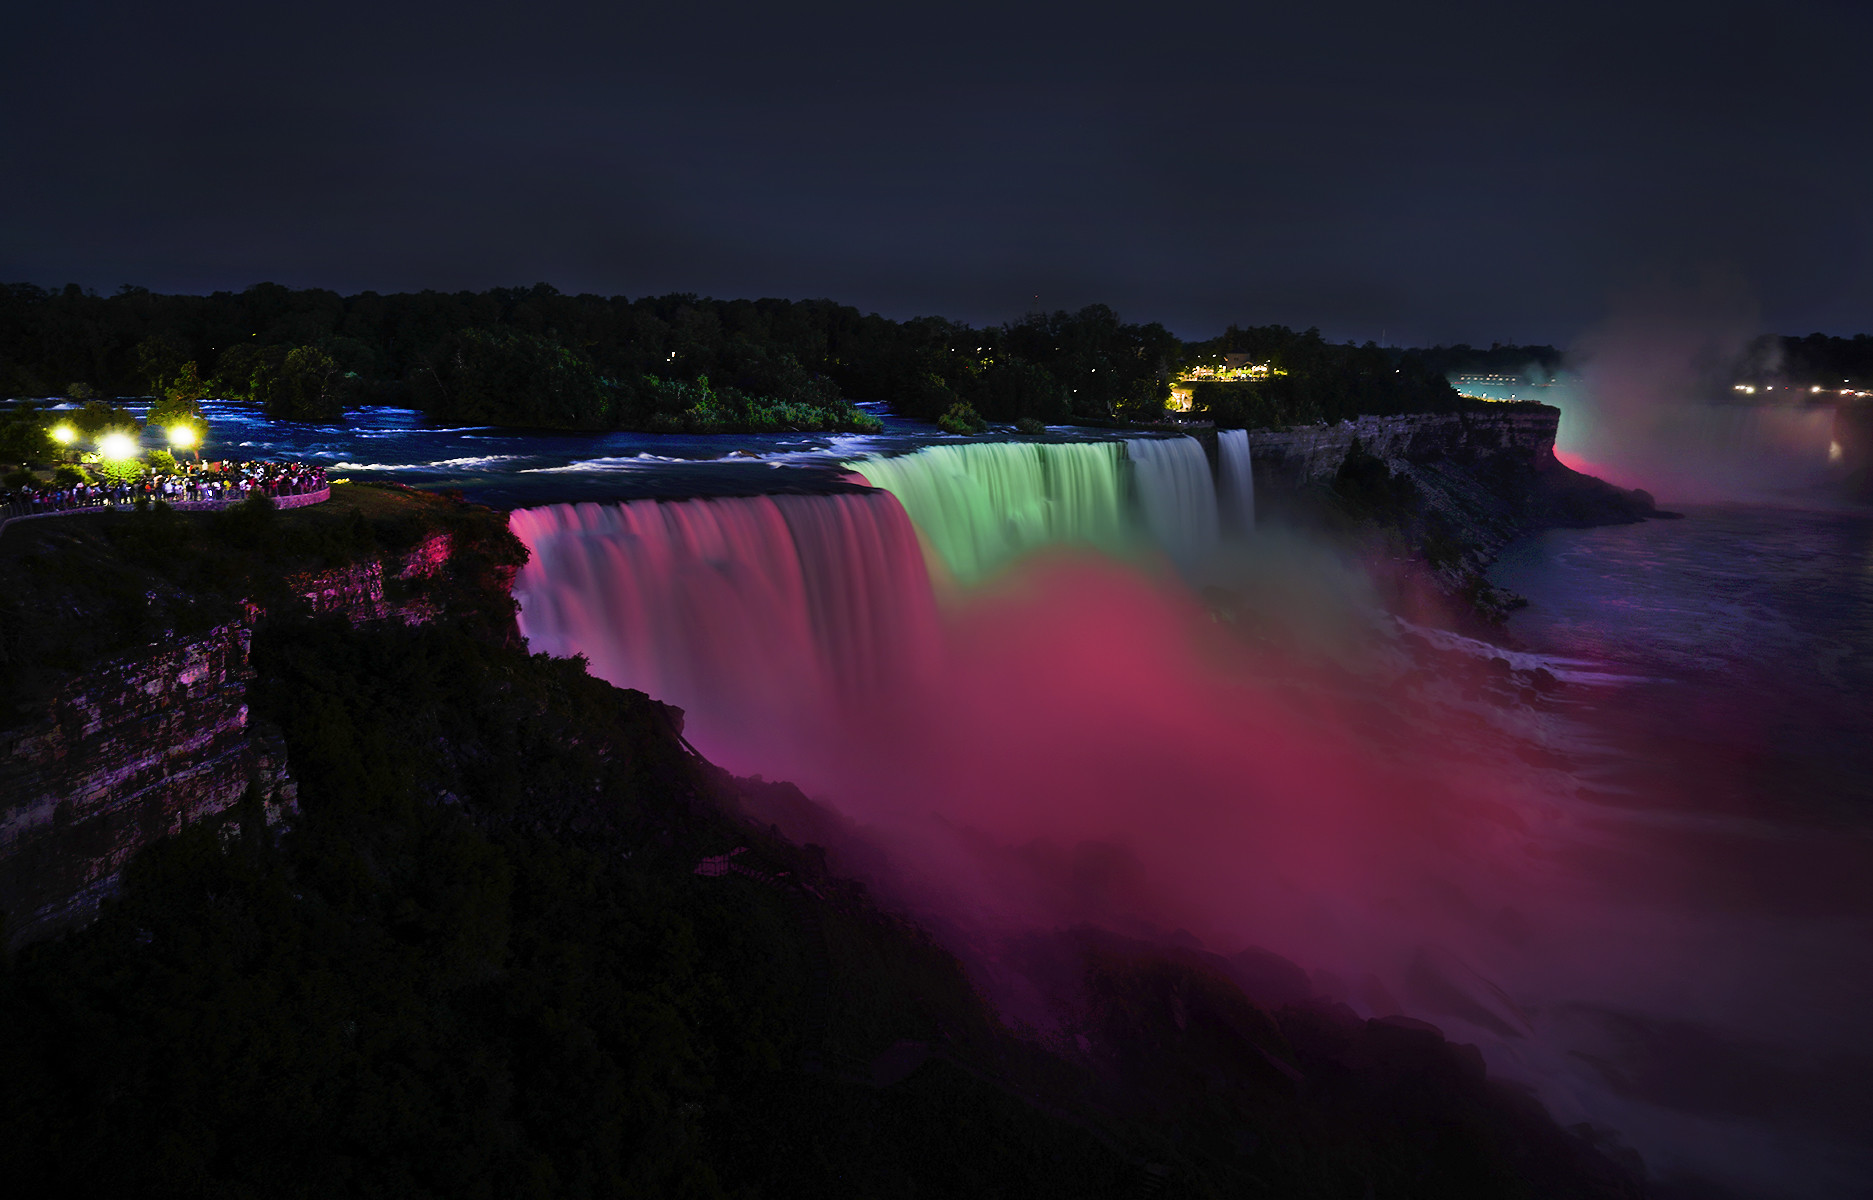 Niagara Falls is seen lit up for the occasion. (Photo by Paul Pasquarello; courtesy of the Office of Gov. Andrew M. Cuomo)